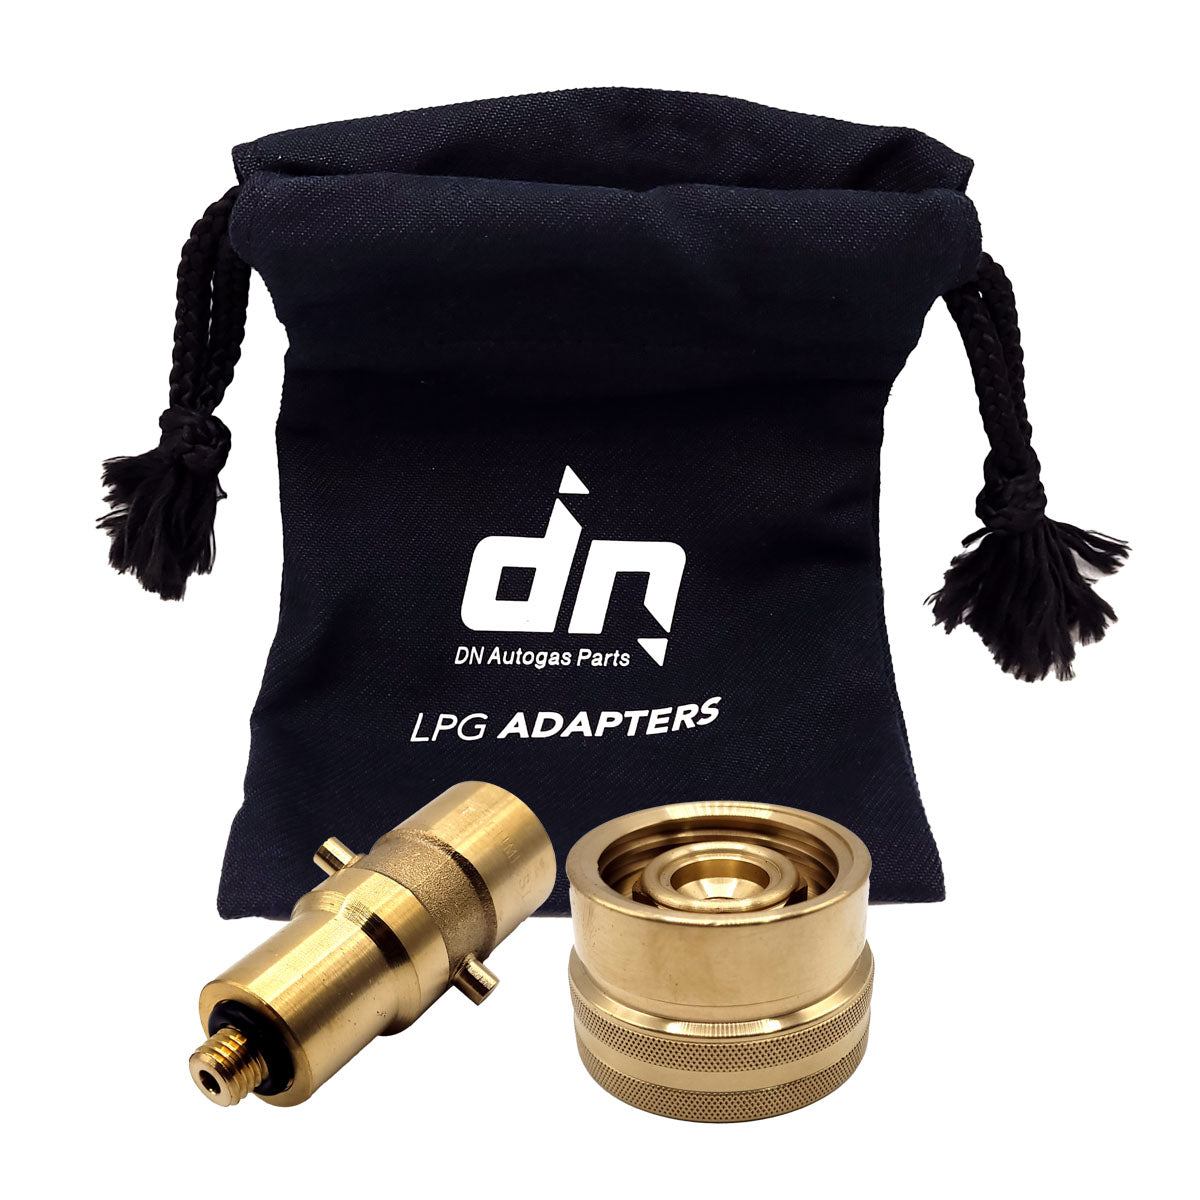 LPG GPL Autogas Tank Refill Adapter Set M10 for Europe ACME to BAYONET or DISH with a Bag